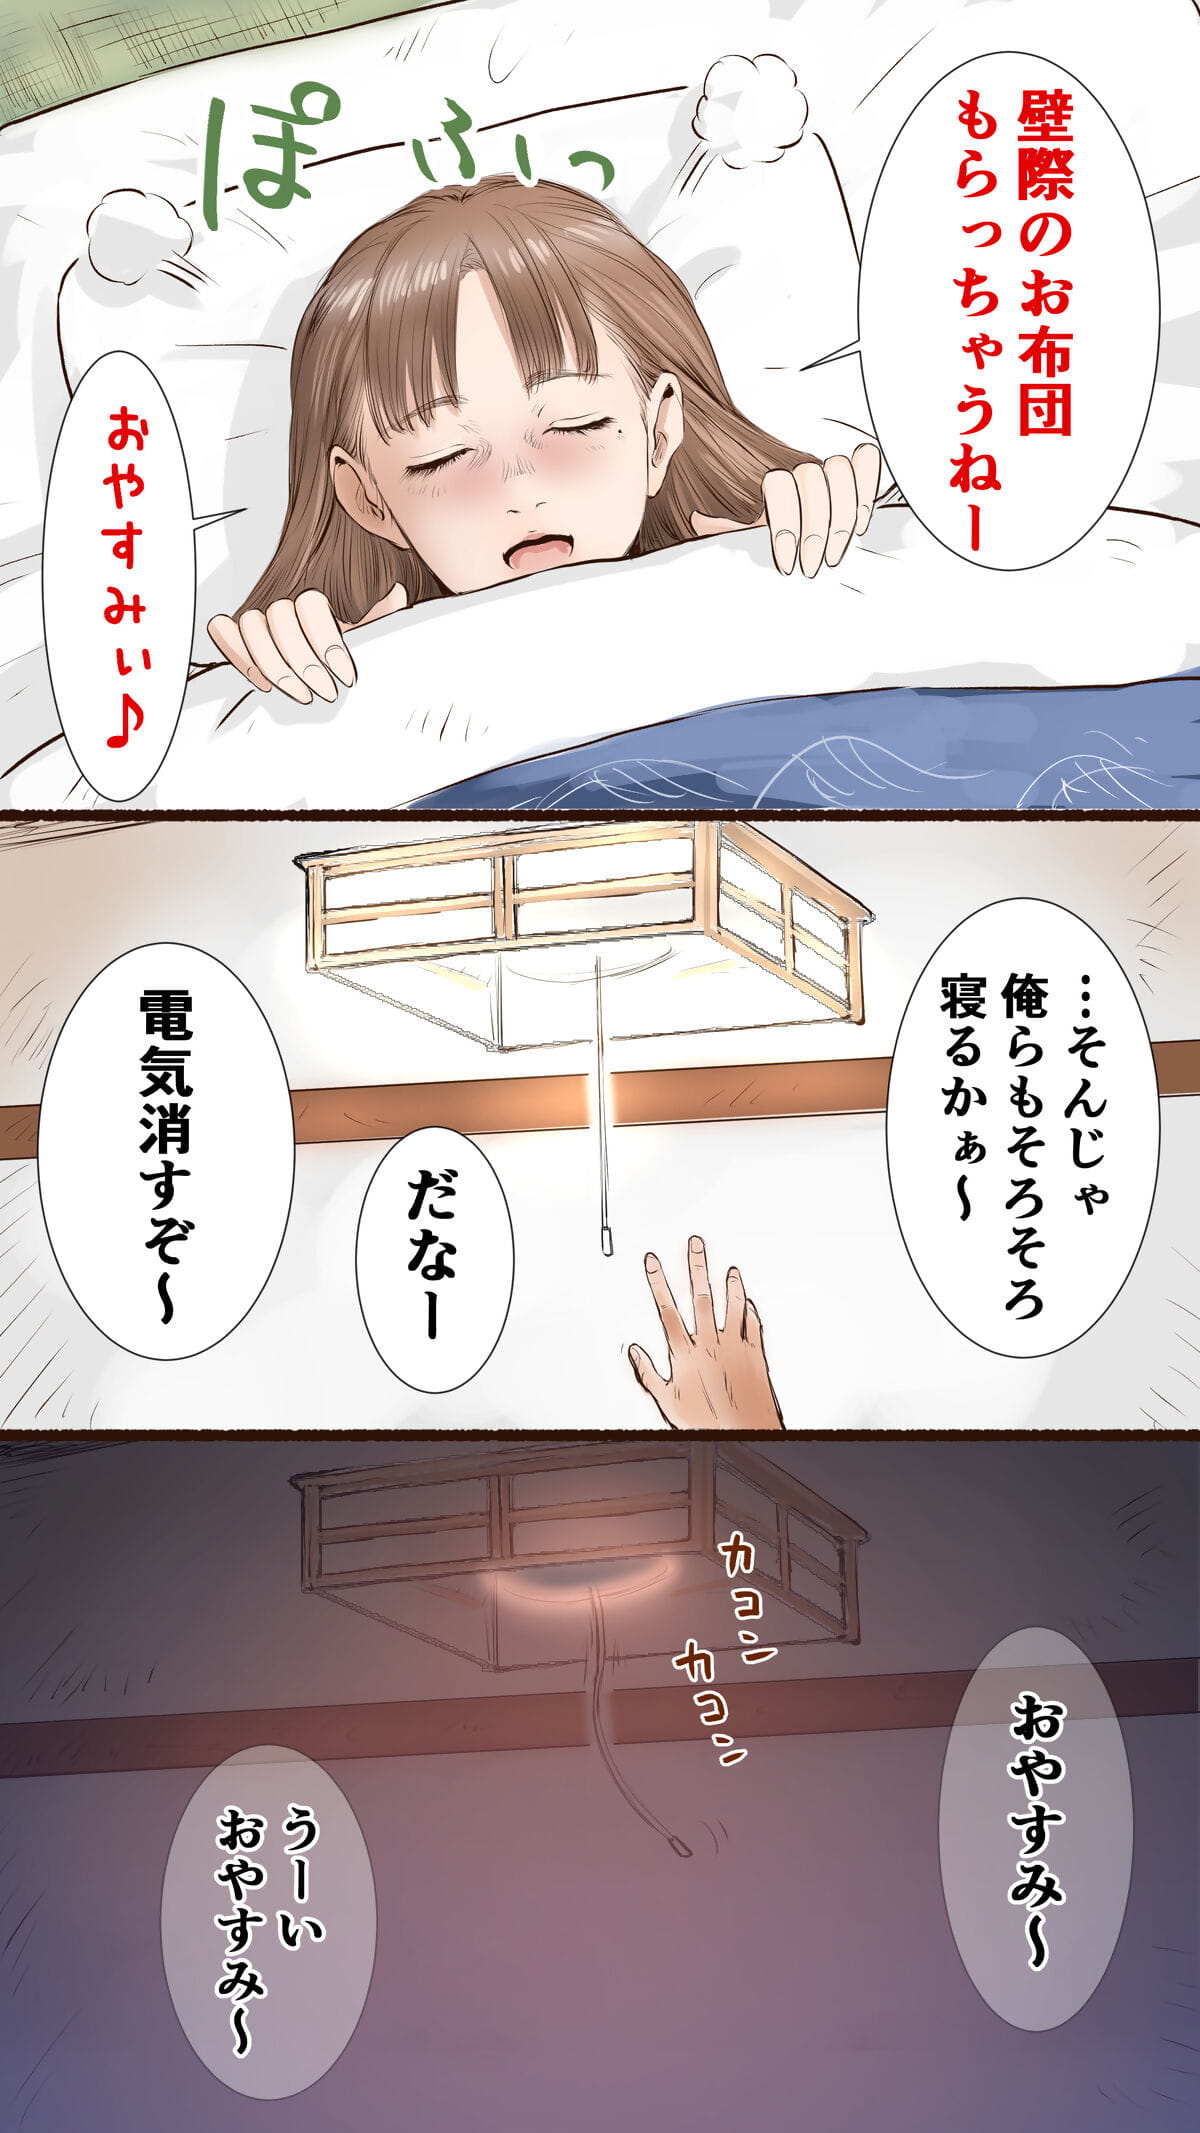 Story of Hot Spring Hotel page 1